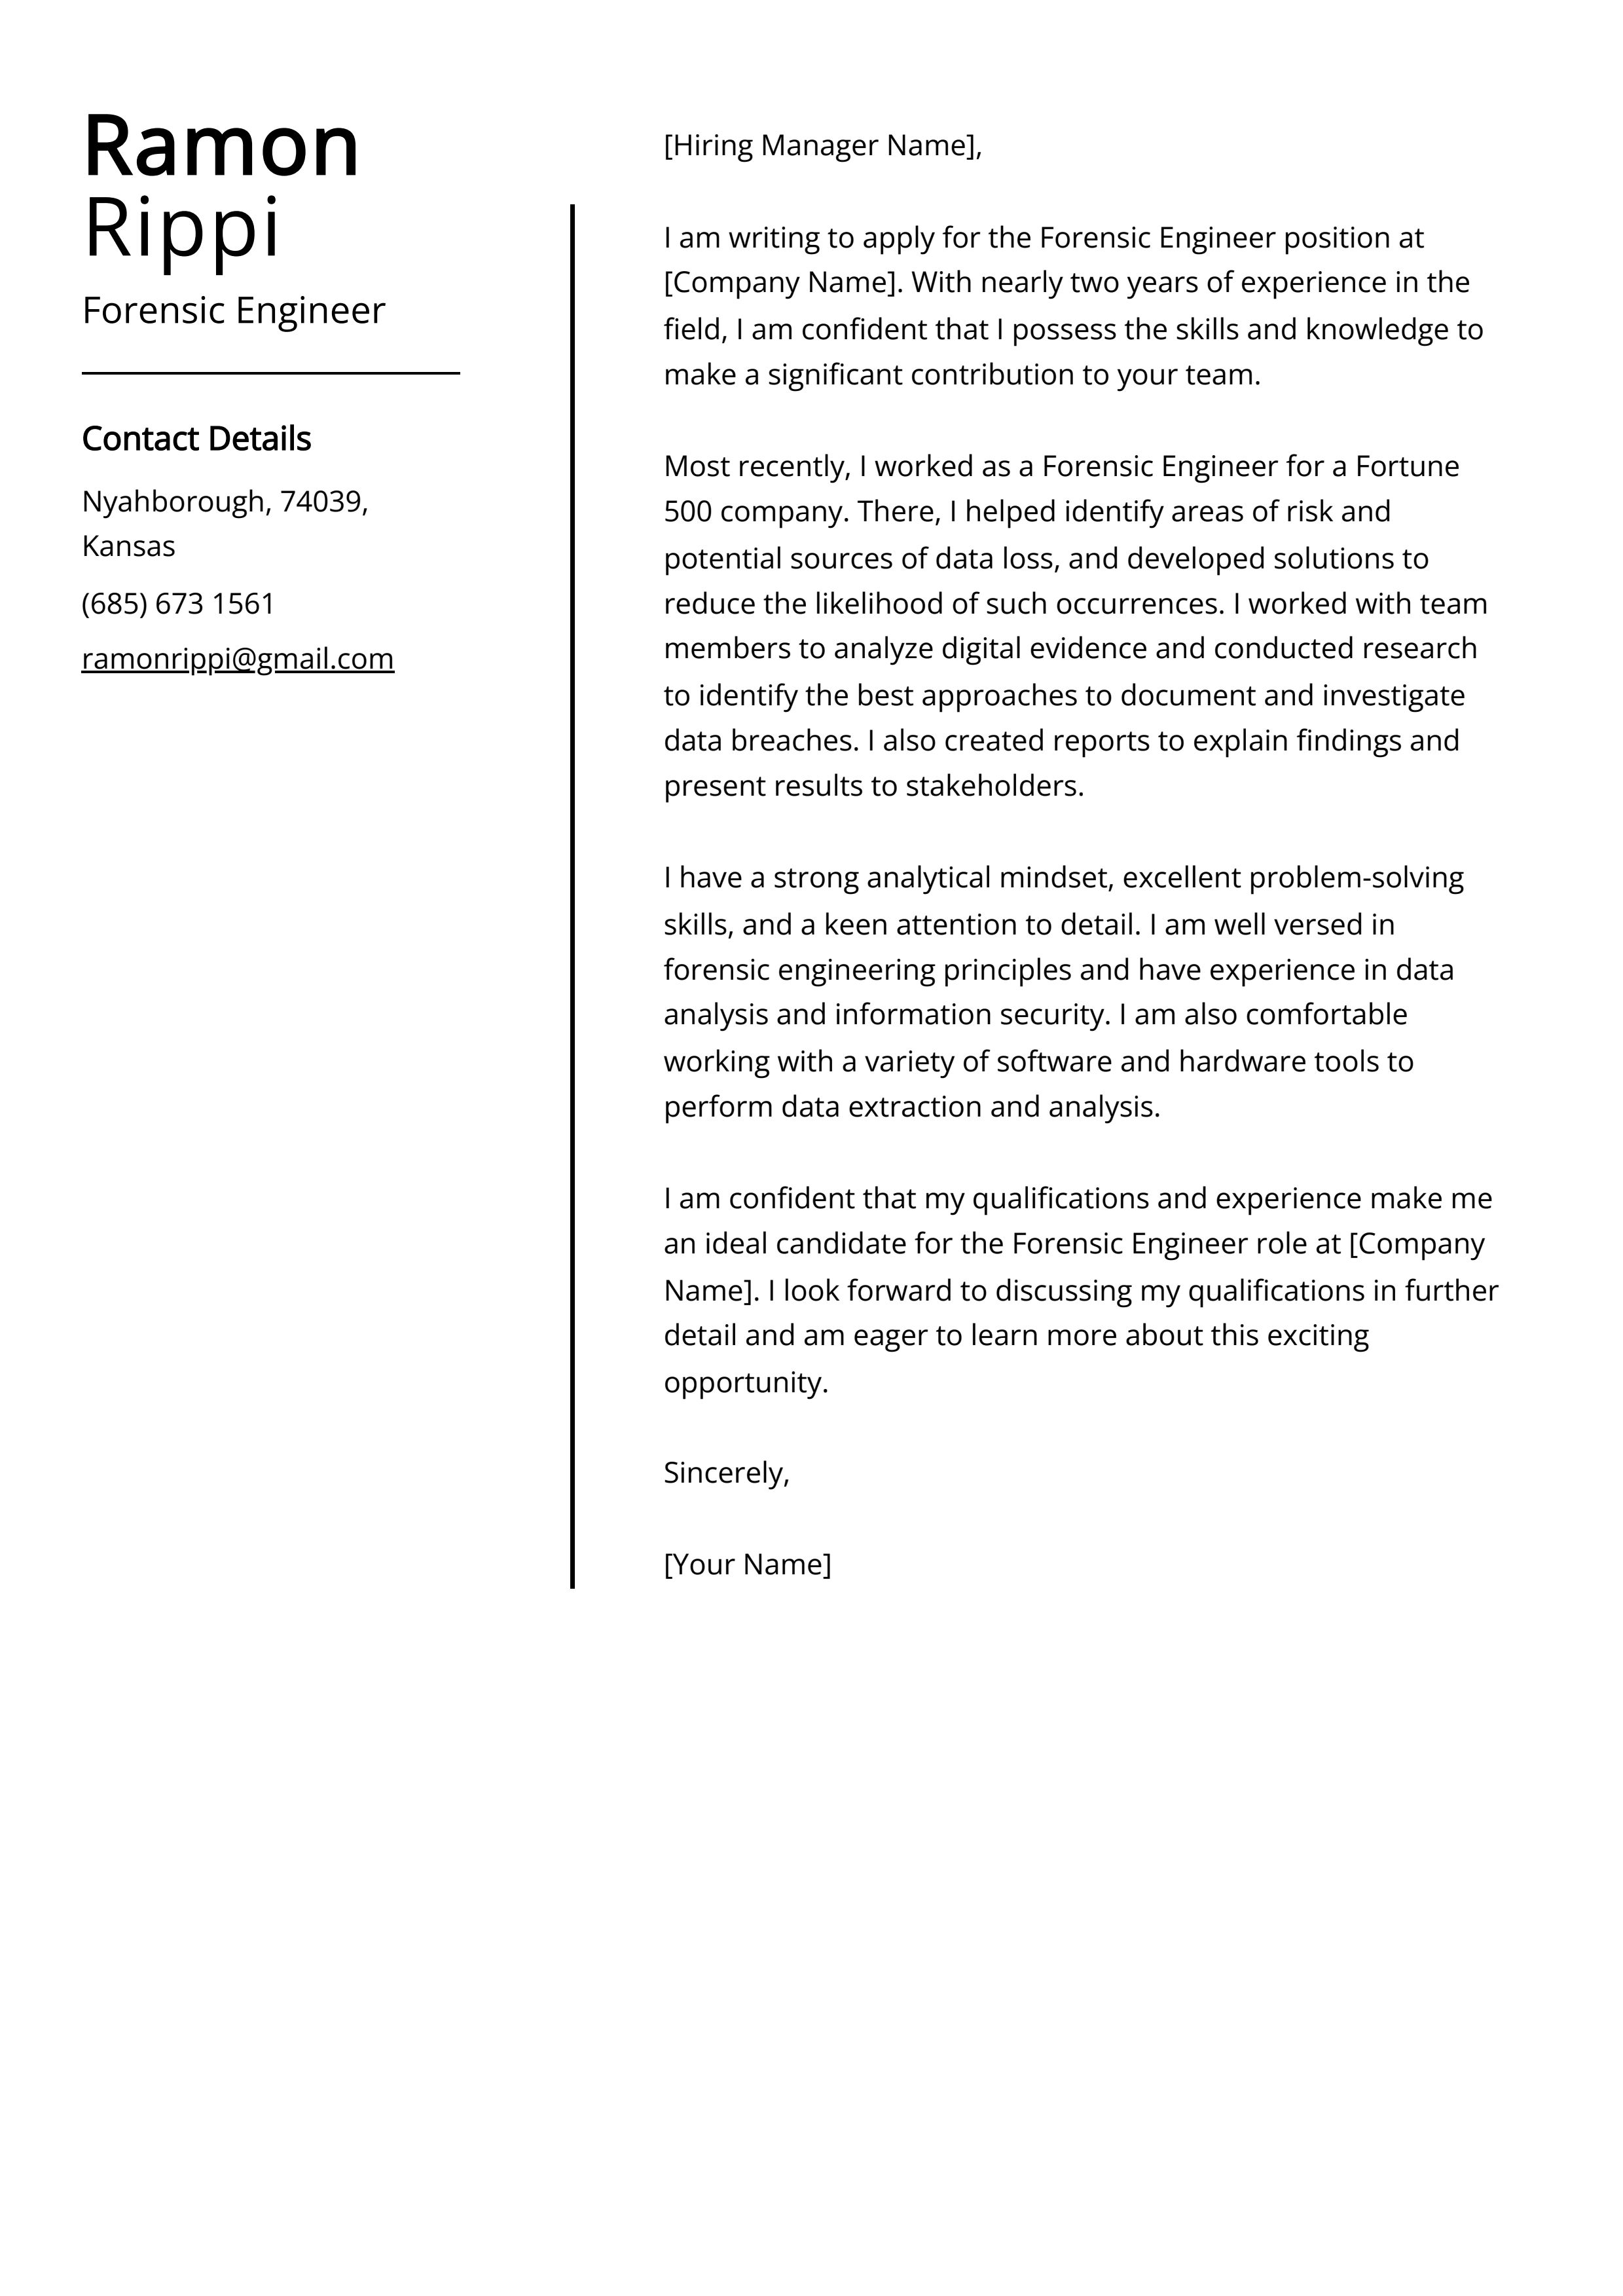 Forensic Engineer Cover Letter Example